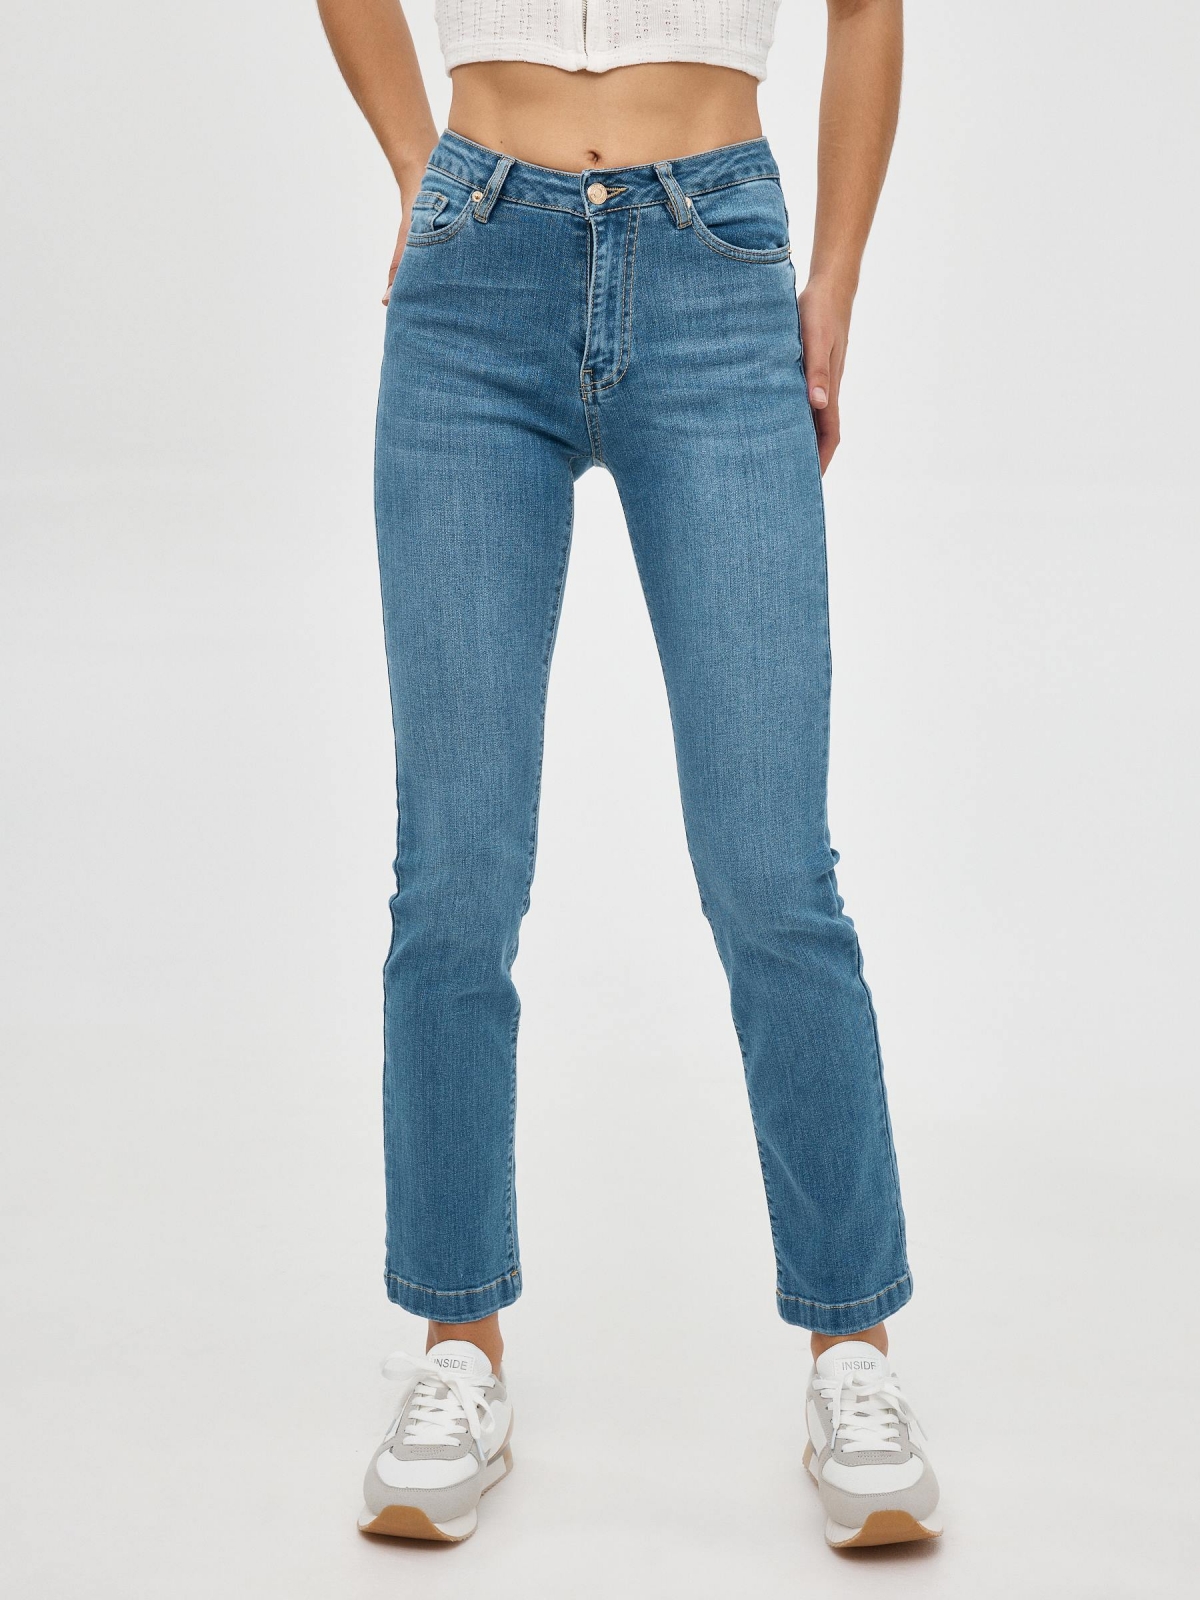 Straight jeans blue middle front view